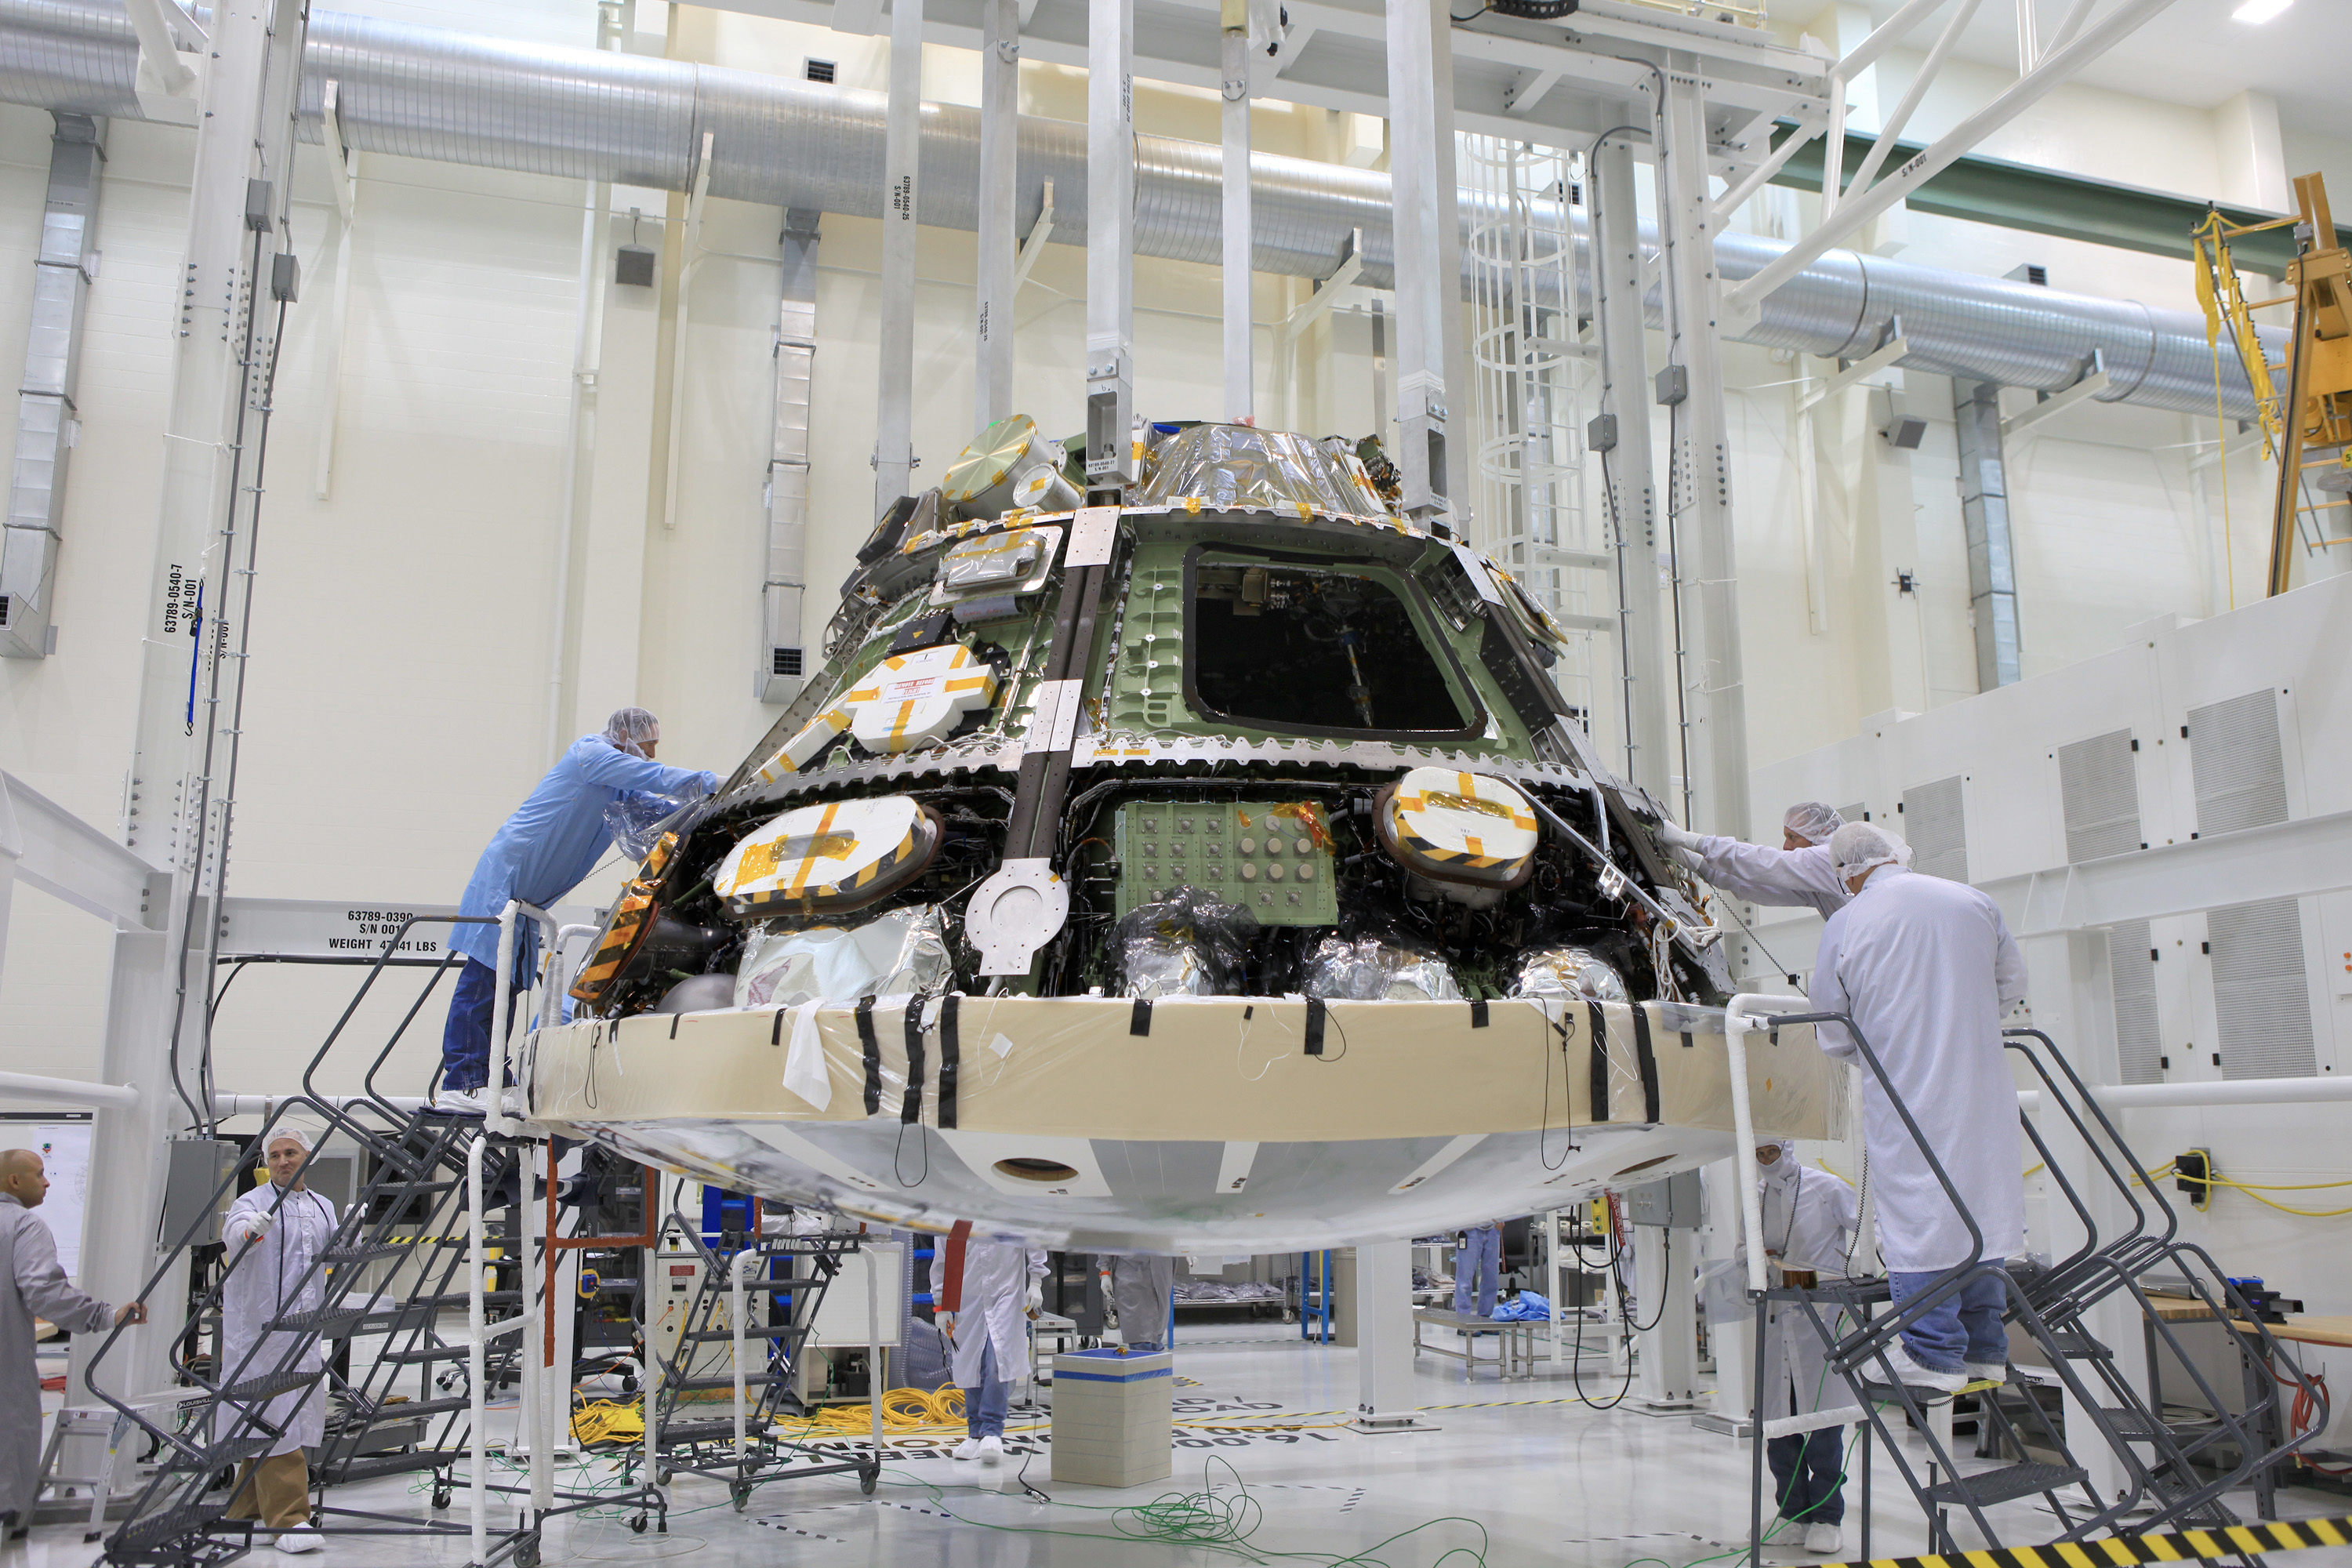 Lockheed Martin technicians and engineers attach the heat shield to the Orion crew module inside the Operations and Checkout Building high bay at NASA's Kennedy Space Center in Florida. Technicians have installed more than 200 instrumentation sensors on the heat shield for Exploration Flight Test-1, or EFT-1. The flight test will provide engineers with data about the heat shield's ability to protect Orion and its future crews from the 4,000-degree heat of reentry and an ocean splashdown following the spacecraft’s 20,000-mph reentry from space. Photo Credit: NASA / Daniel Casper